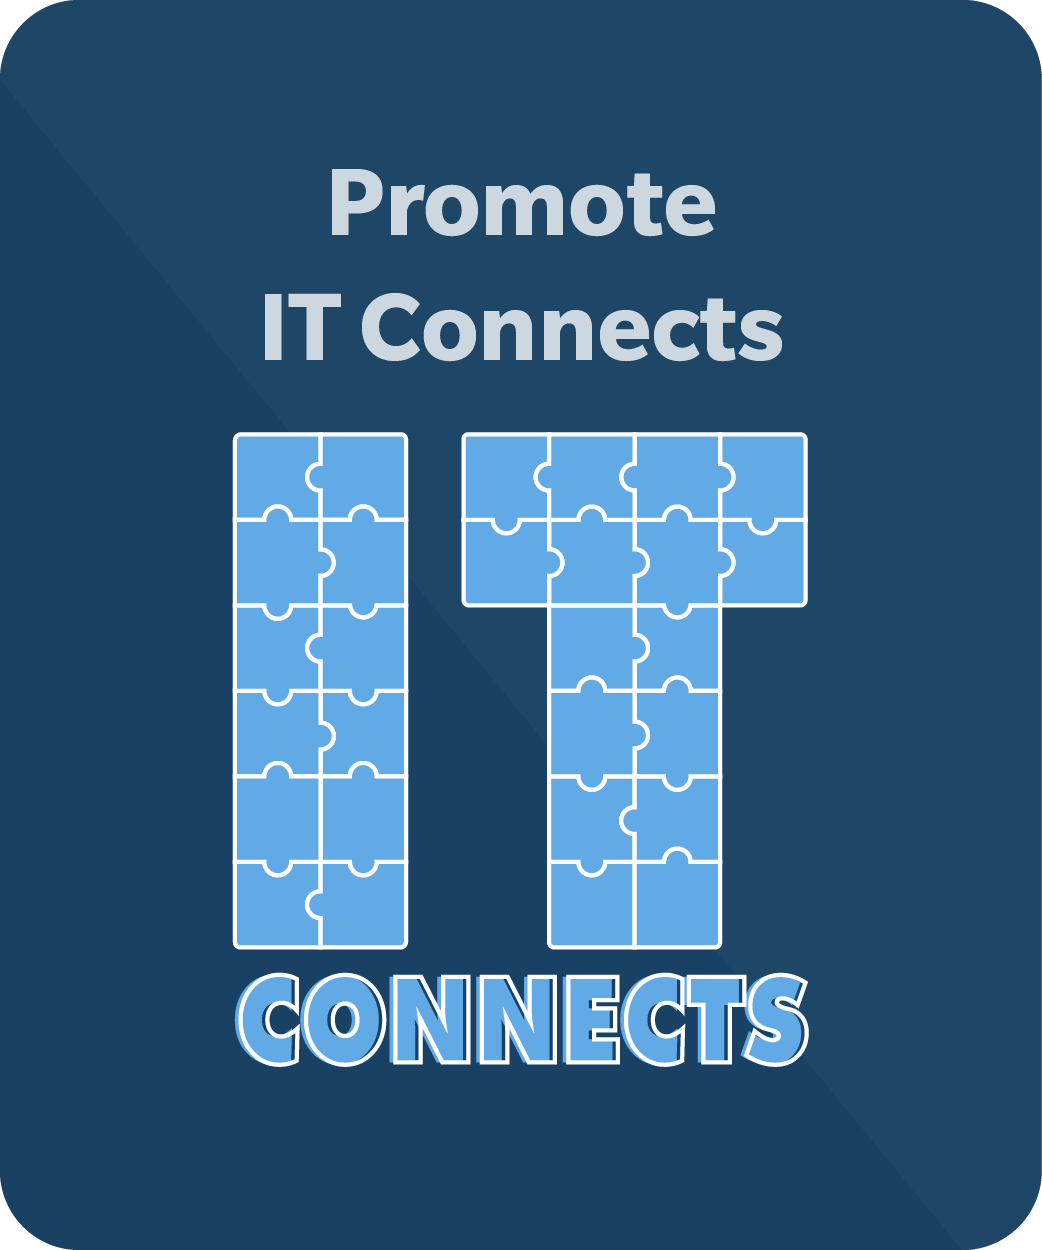 Promote IT Connects, IT Connects logo